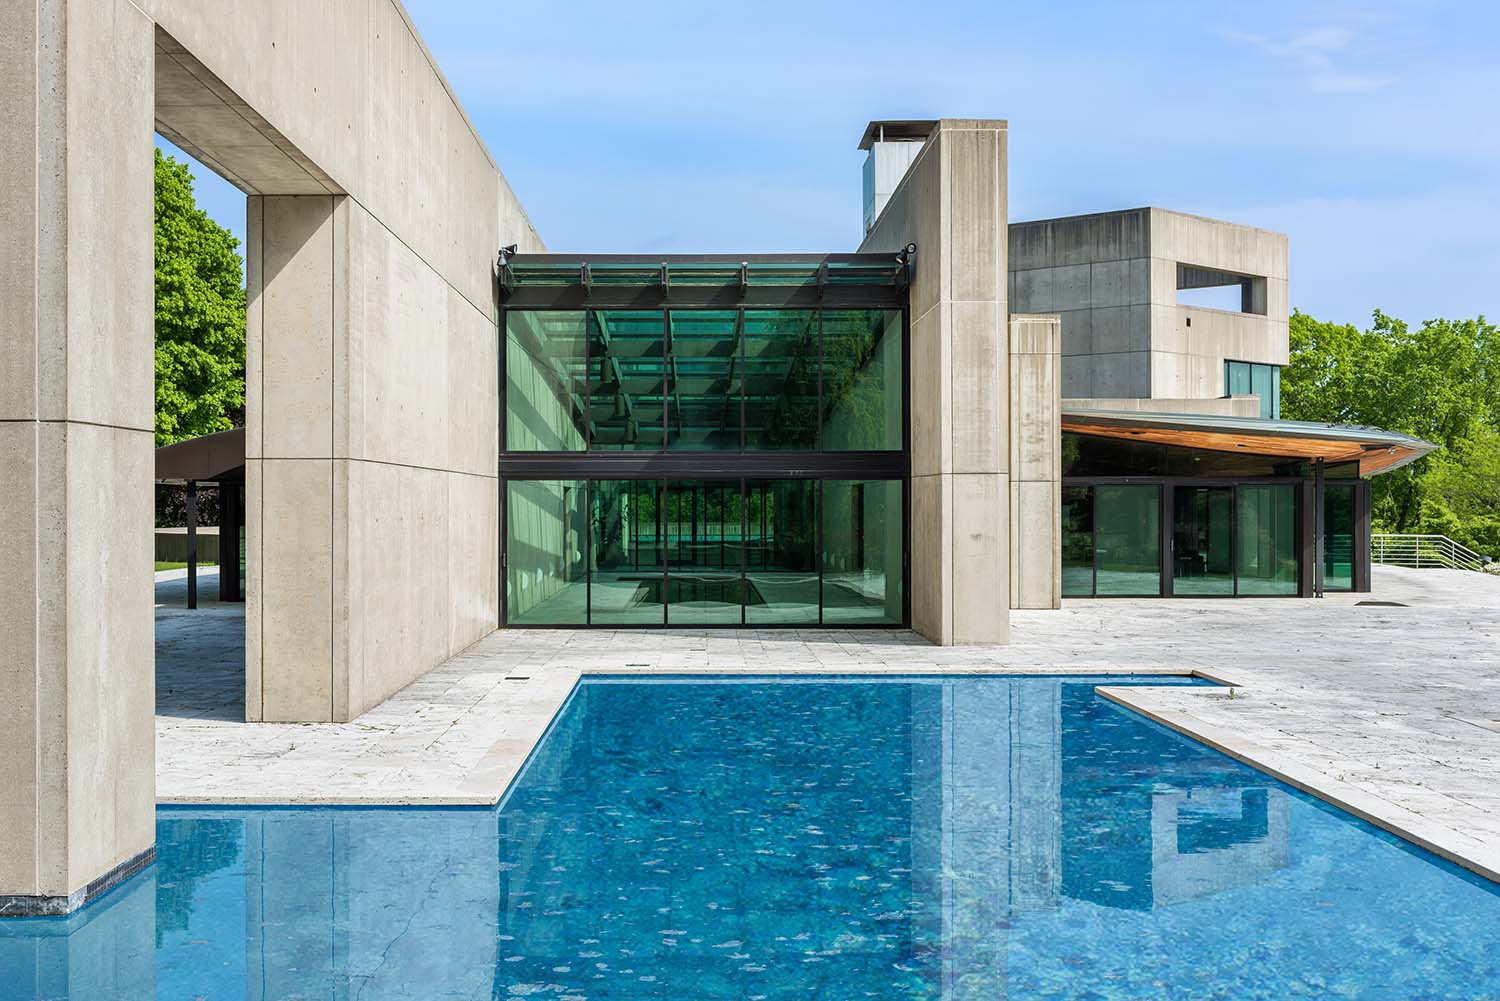 A house designed by Rafael Viñoly with stark concrete walls and a pool